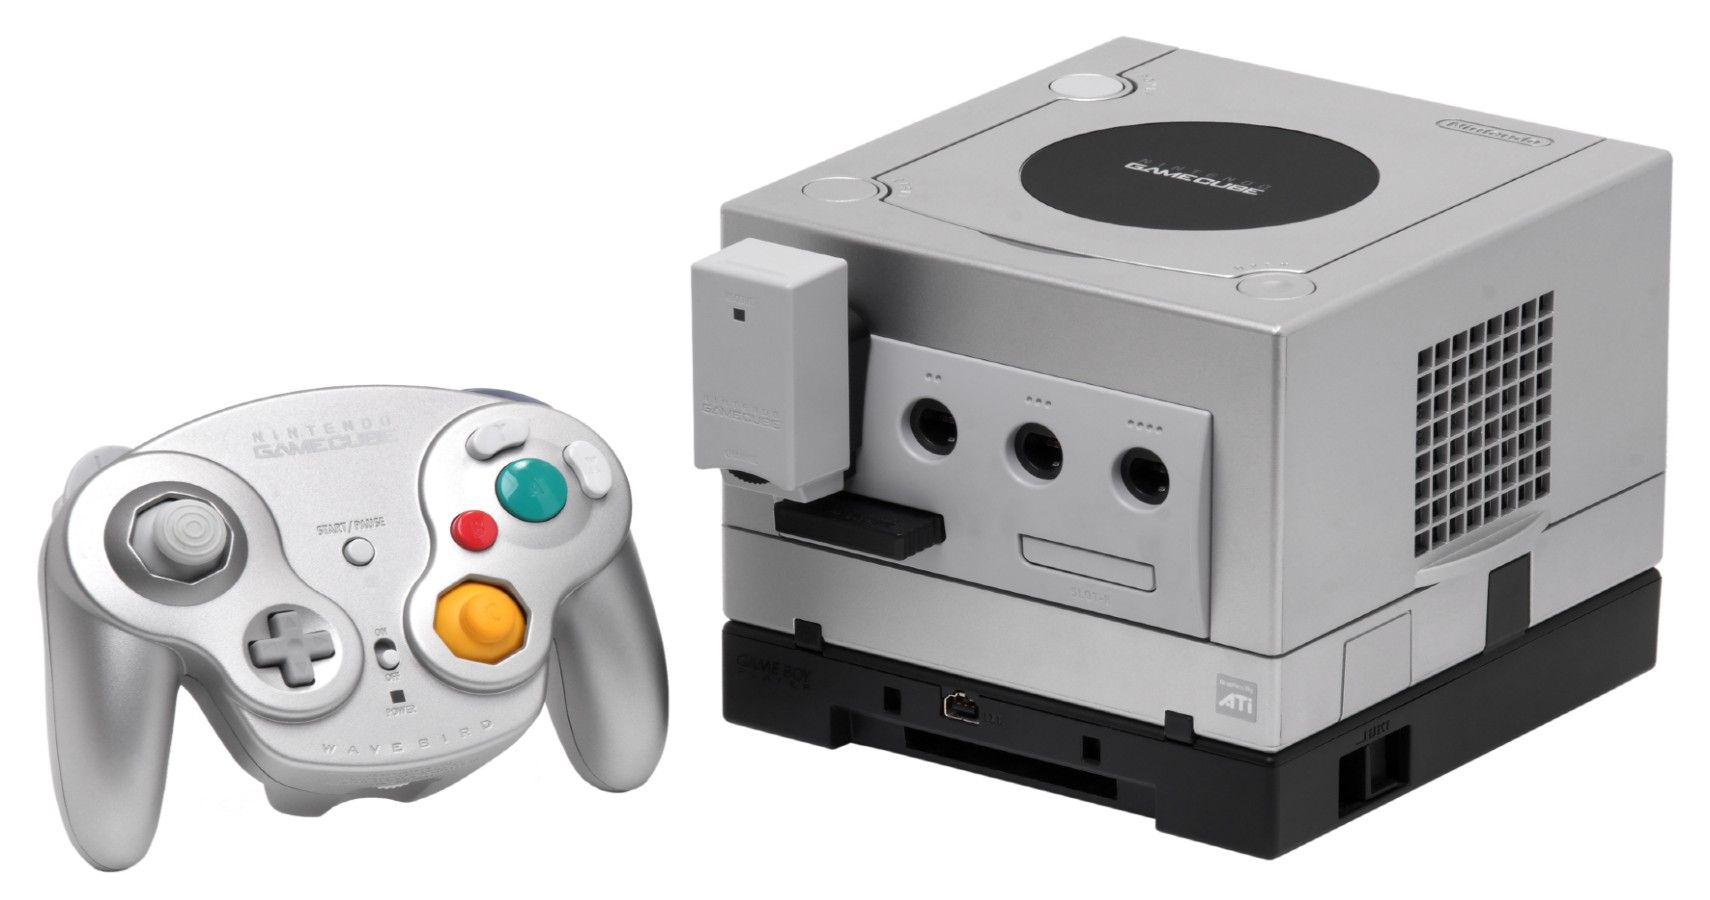 10 Things You Didn't Know About The GameCube